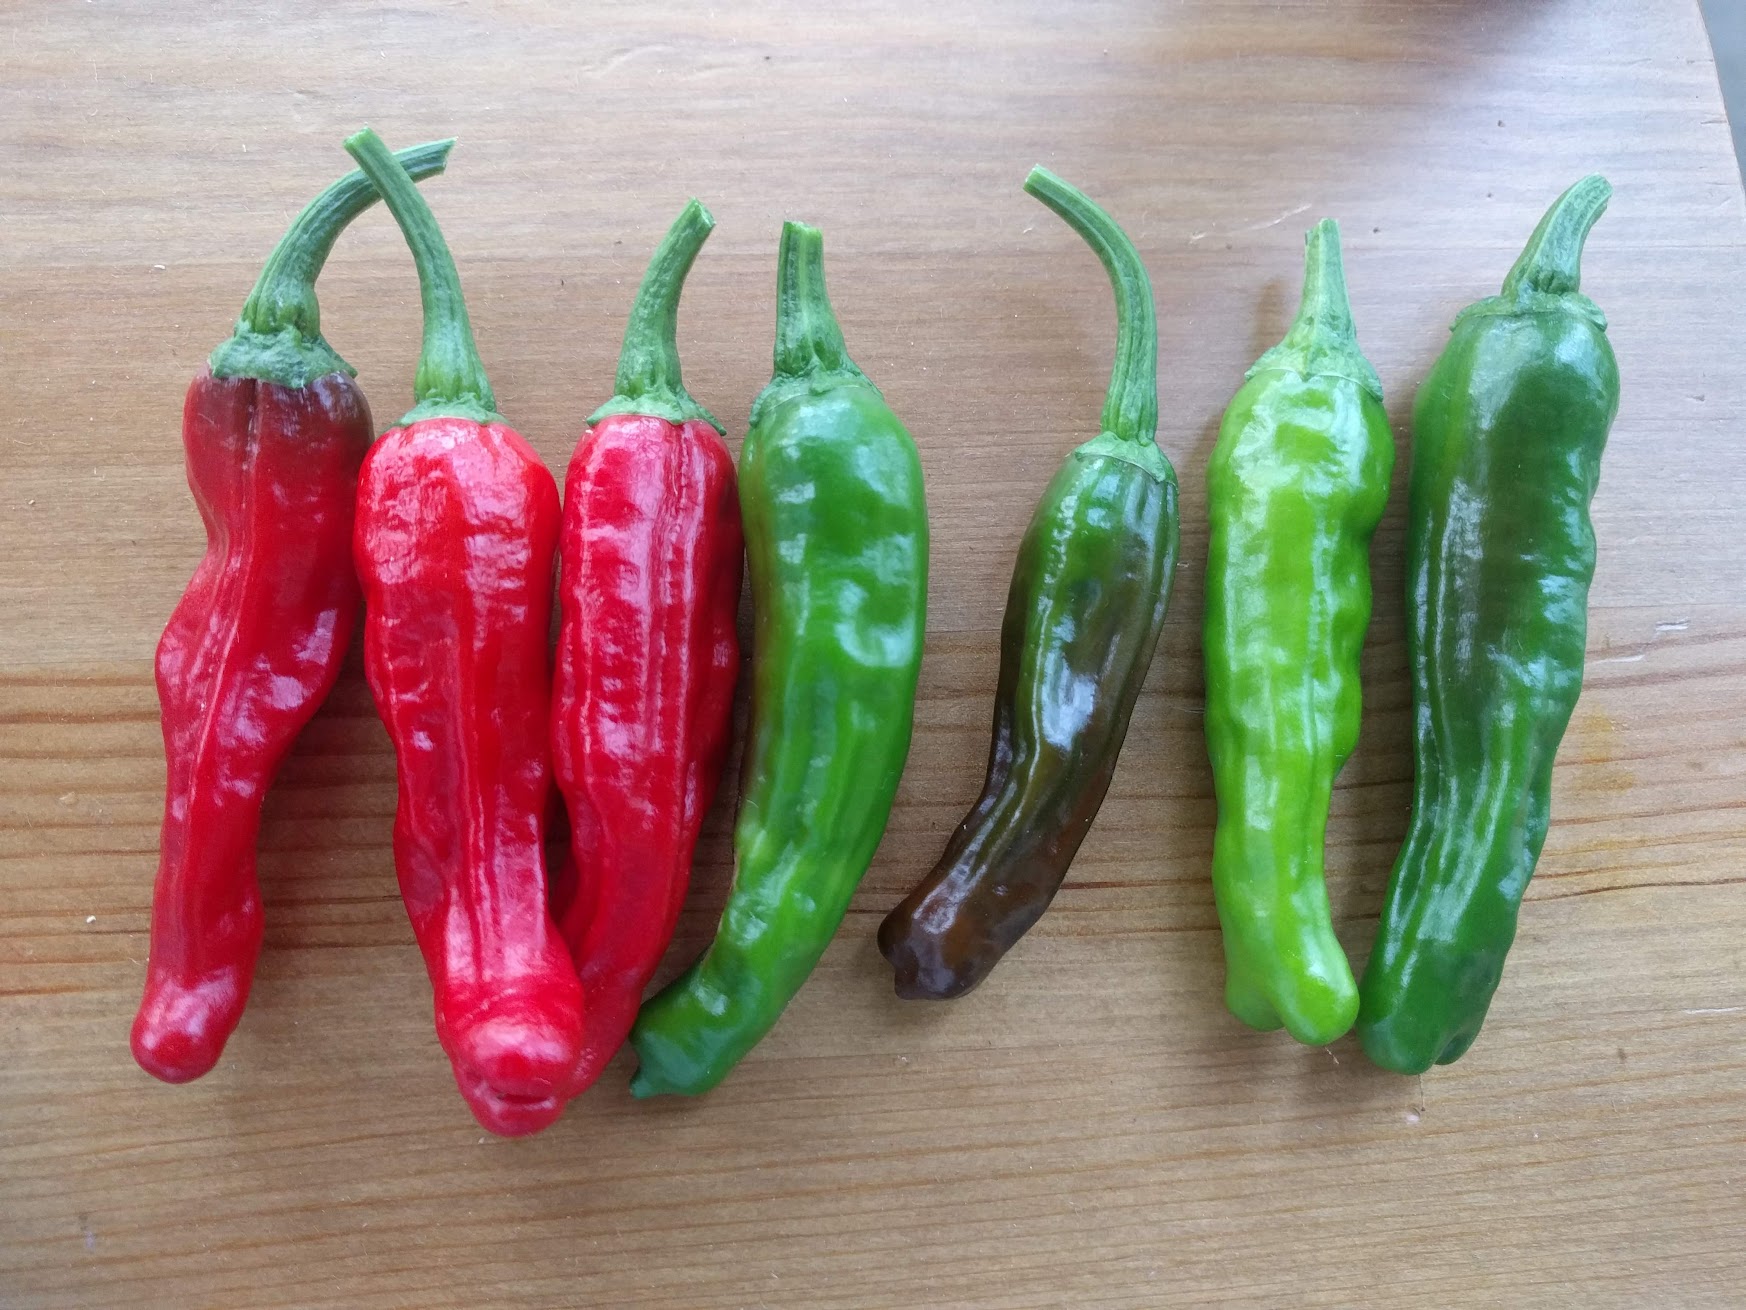 Why are my shishito peppers hot?